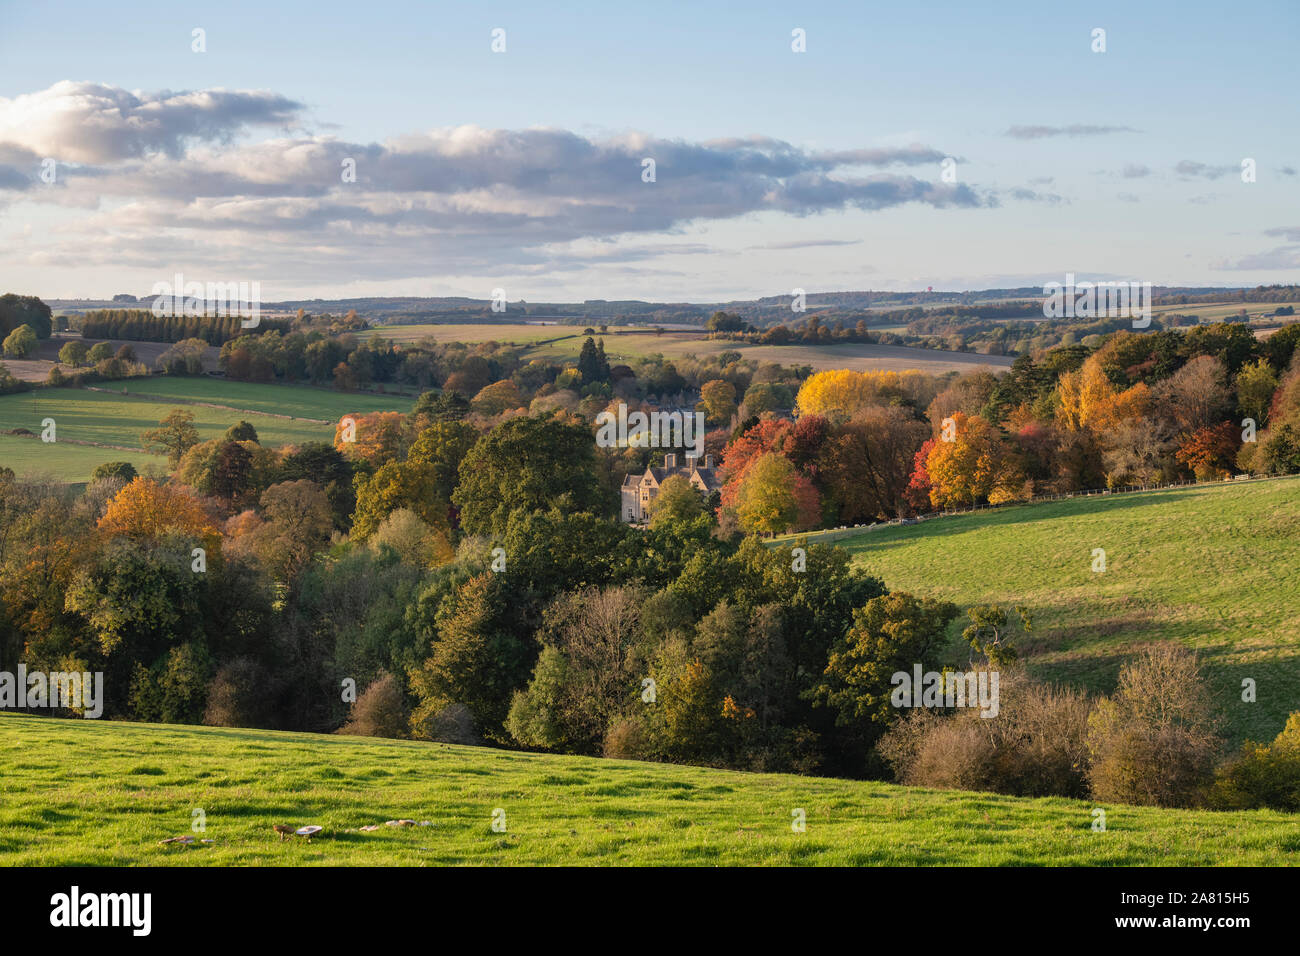 Abbotswood estate in autunno. Stow on the wold, Cotswolds, Gloucestershire, Inghilterra Foto Stock